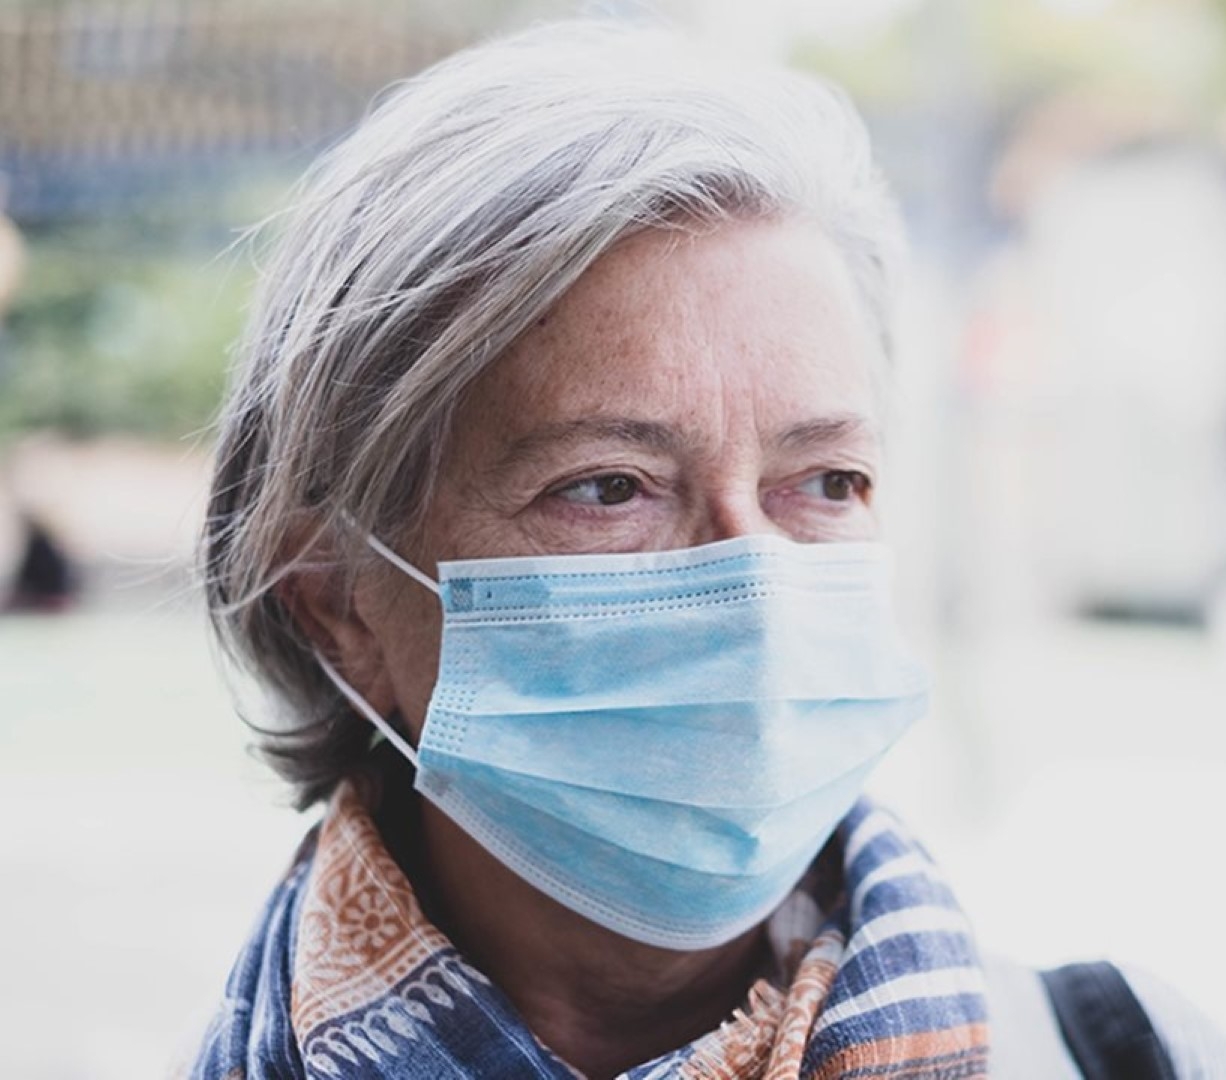 An elderly woman wearing a protective face mask to prevent the spread of germs.